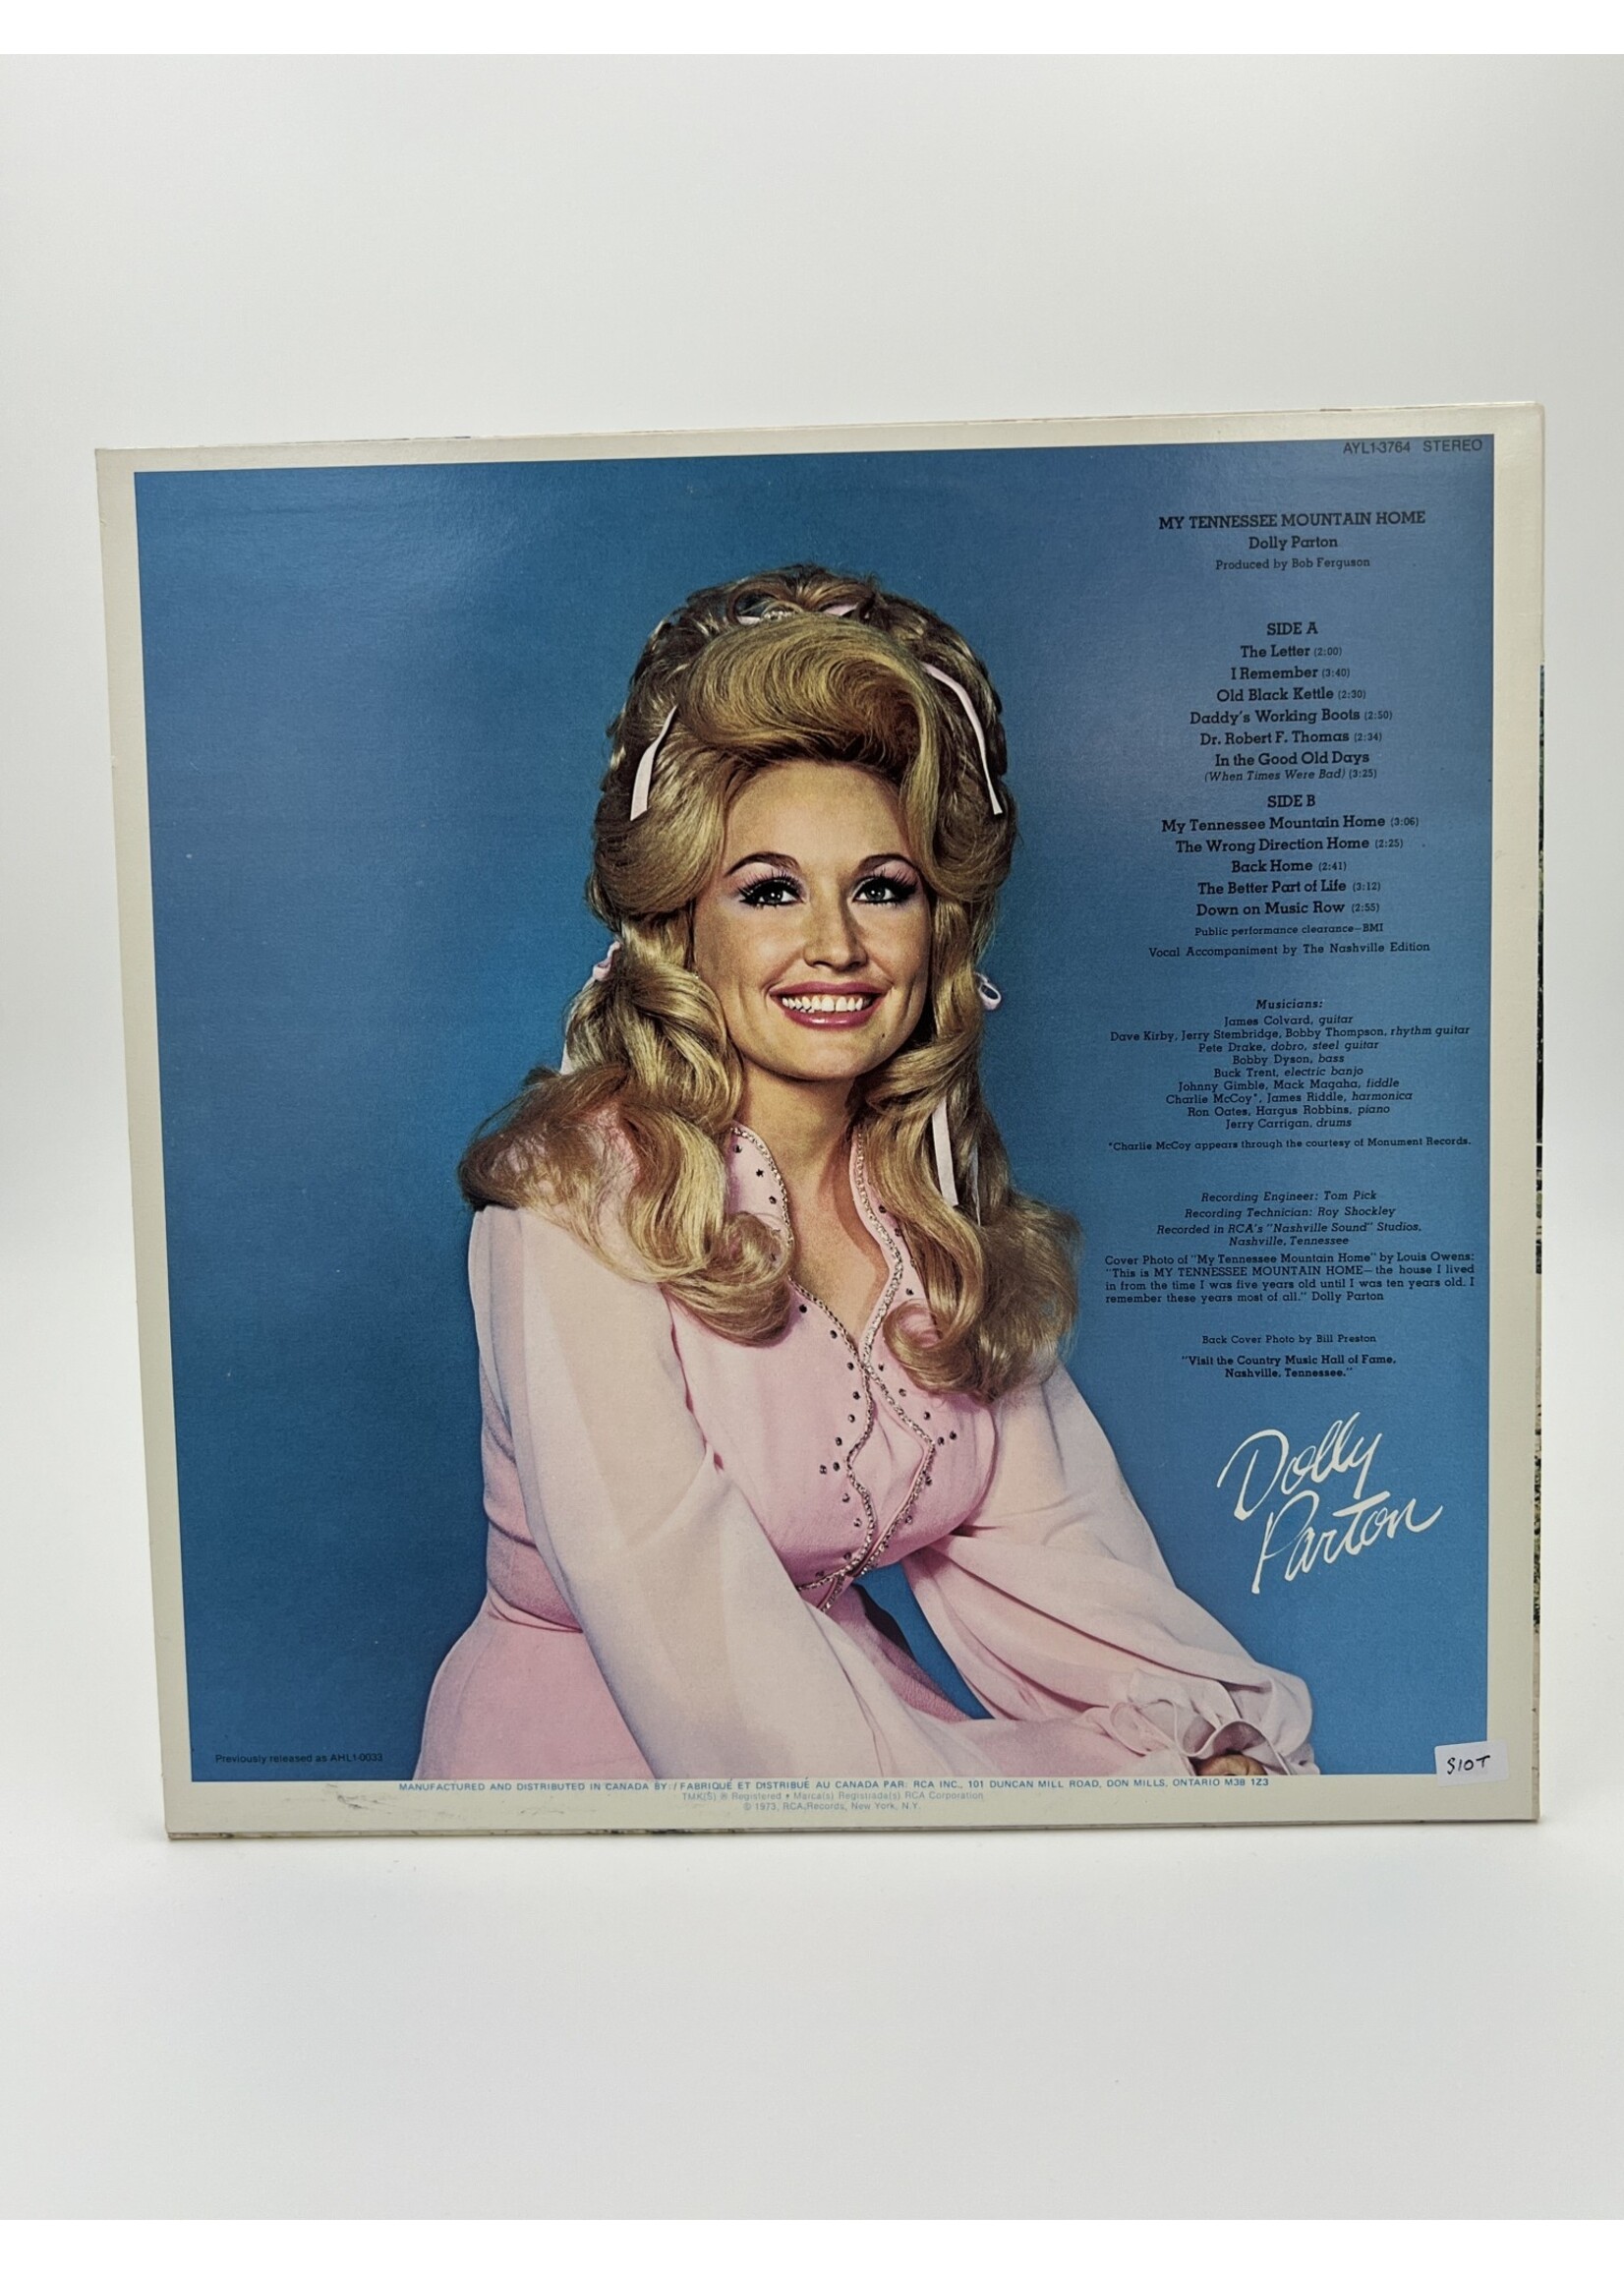 LP   Dolly Parton My Tennessee Mountain Home LP Record